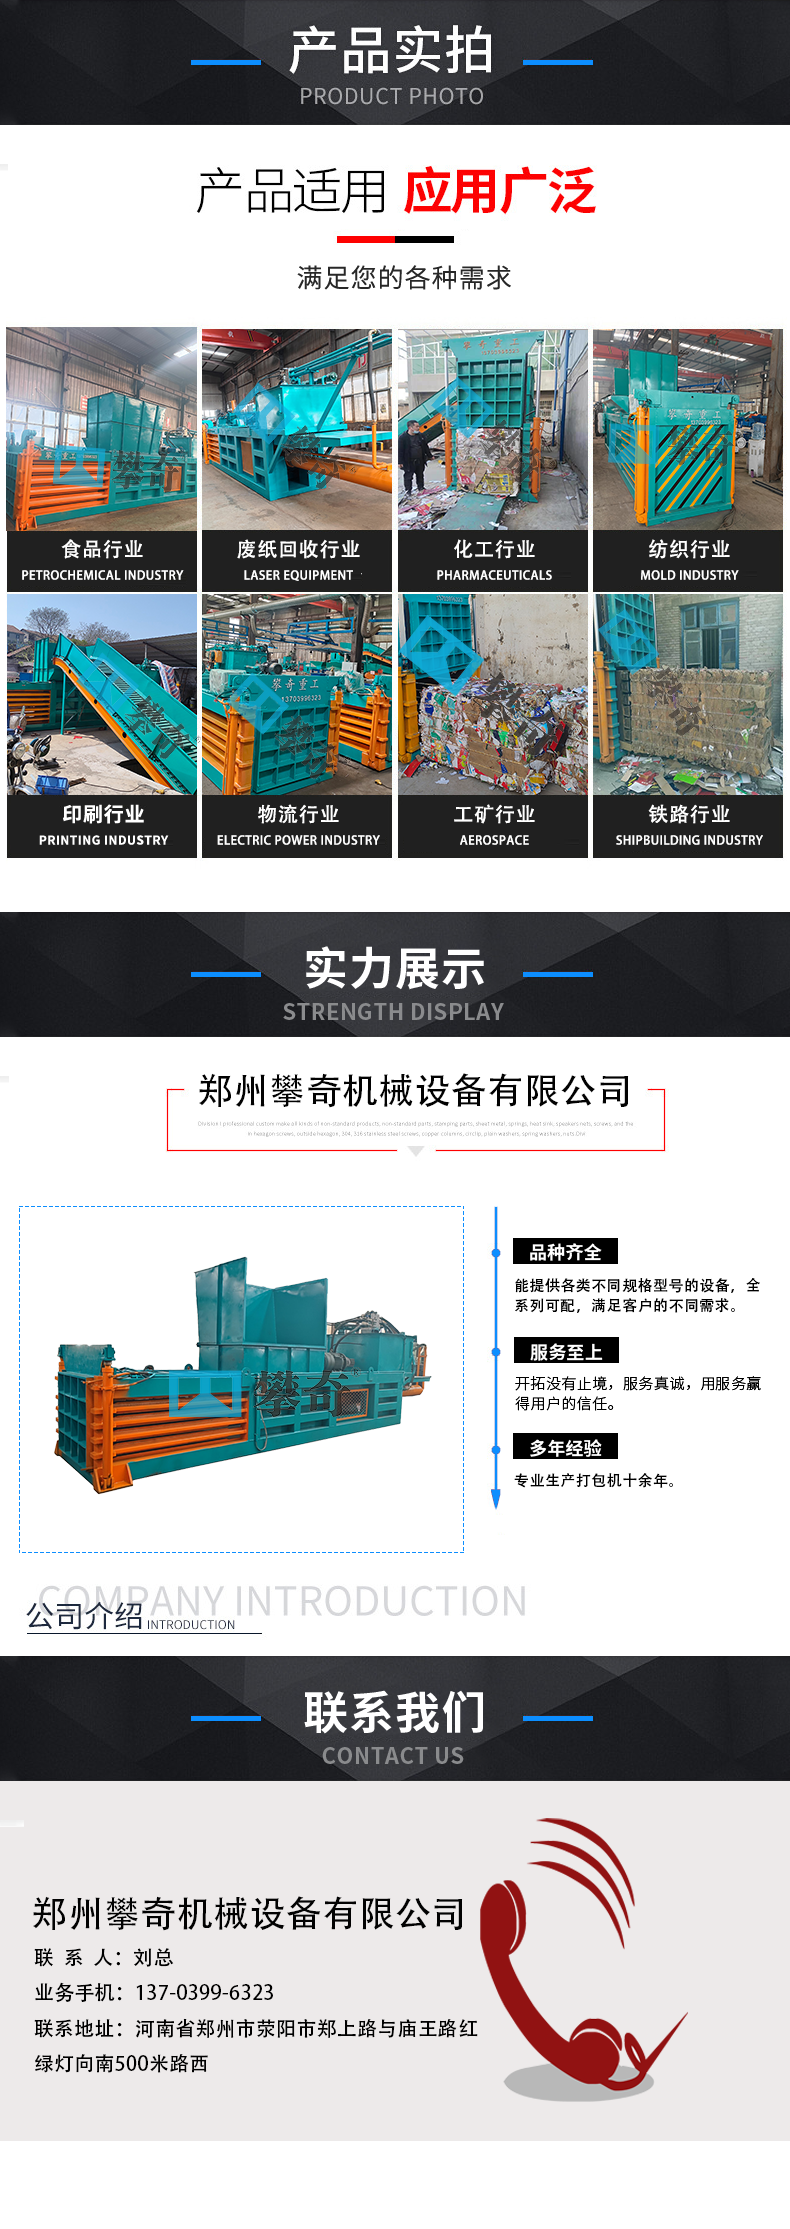 100 ton horizontal hydraulic packaging machine for industrial solid waste, plastic film, textile block press